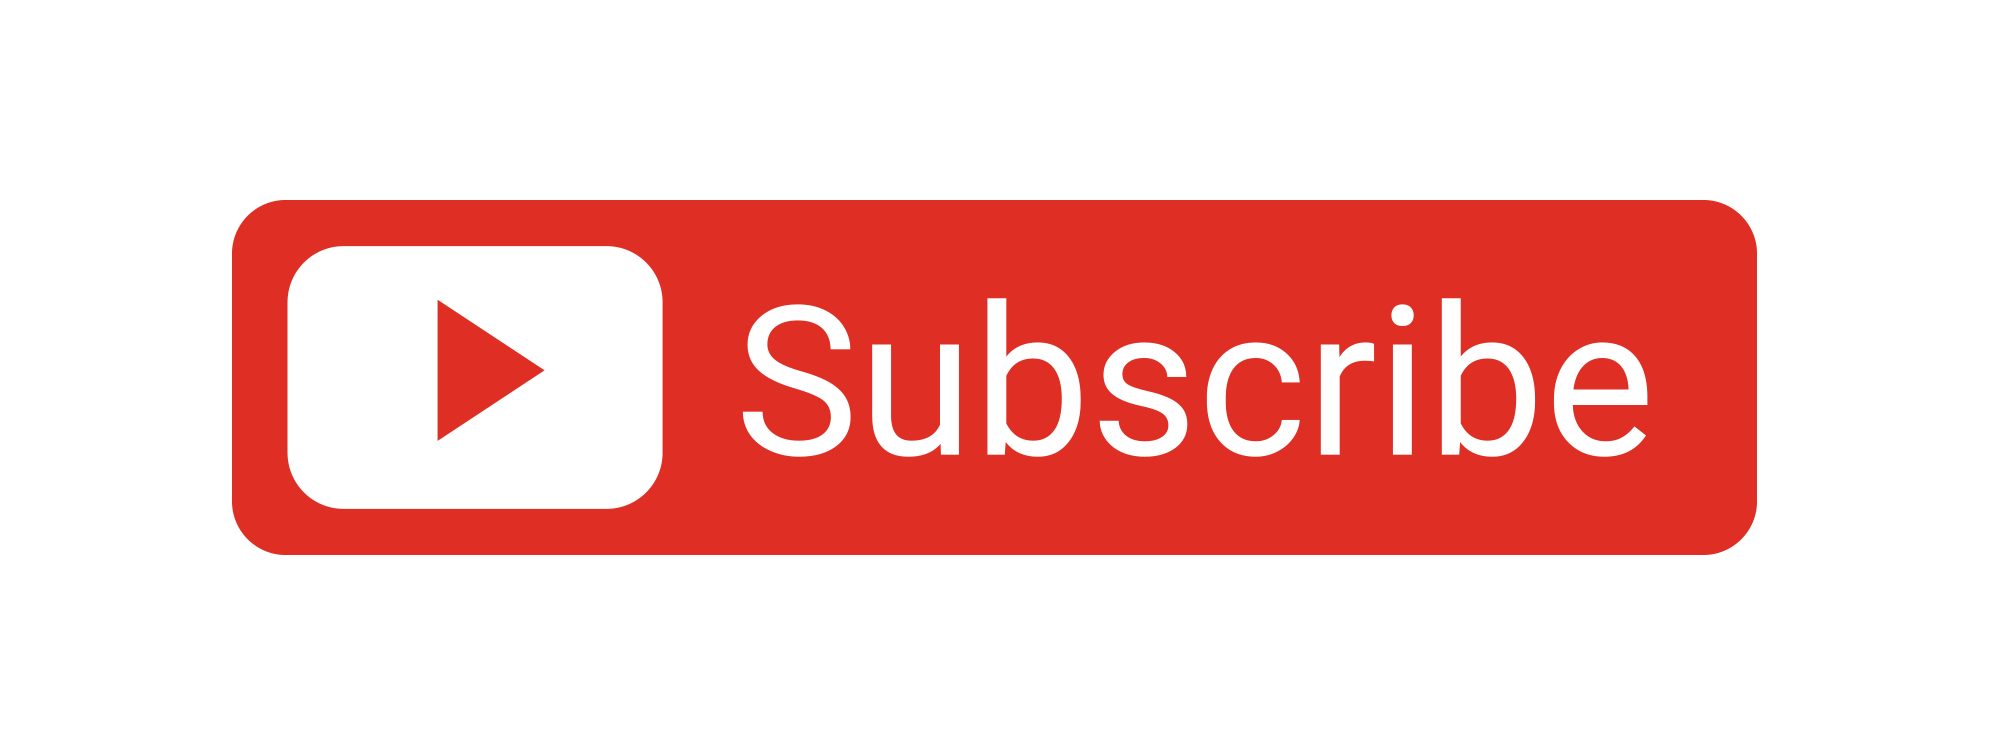 Subscribe Button PNG Subscribe Buttons Transparent Images Free Transparent PNG Logos